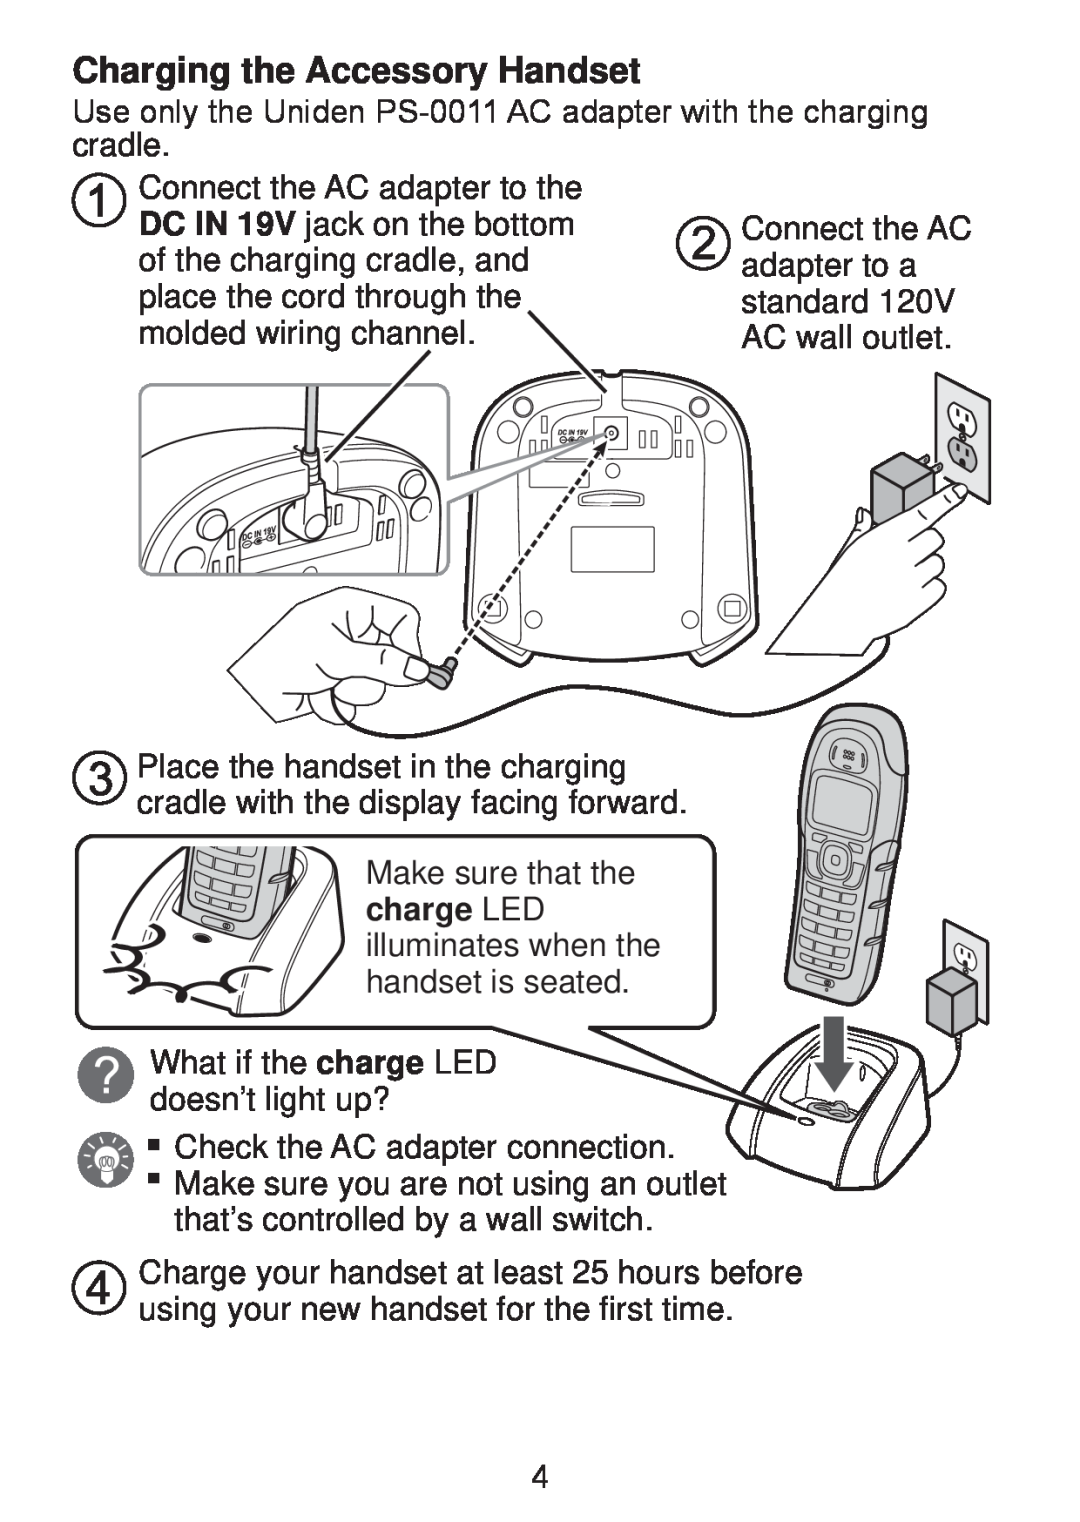 Uniden DWX207 manual Charging the Accessory Handset 